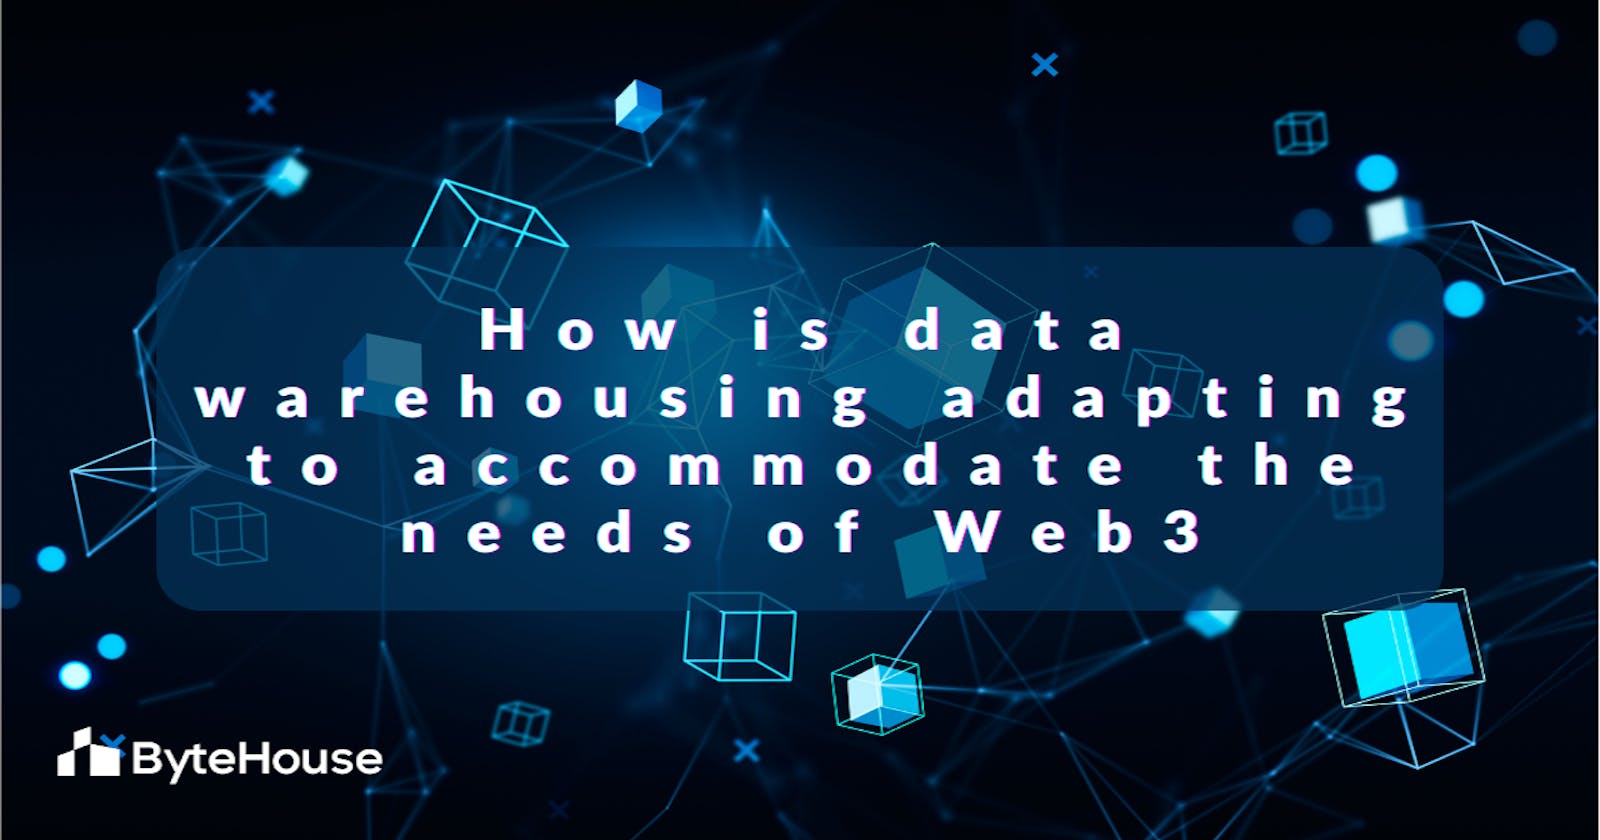 How is data warehousing adapting to accommodate the needs of Web3